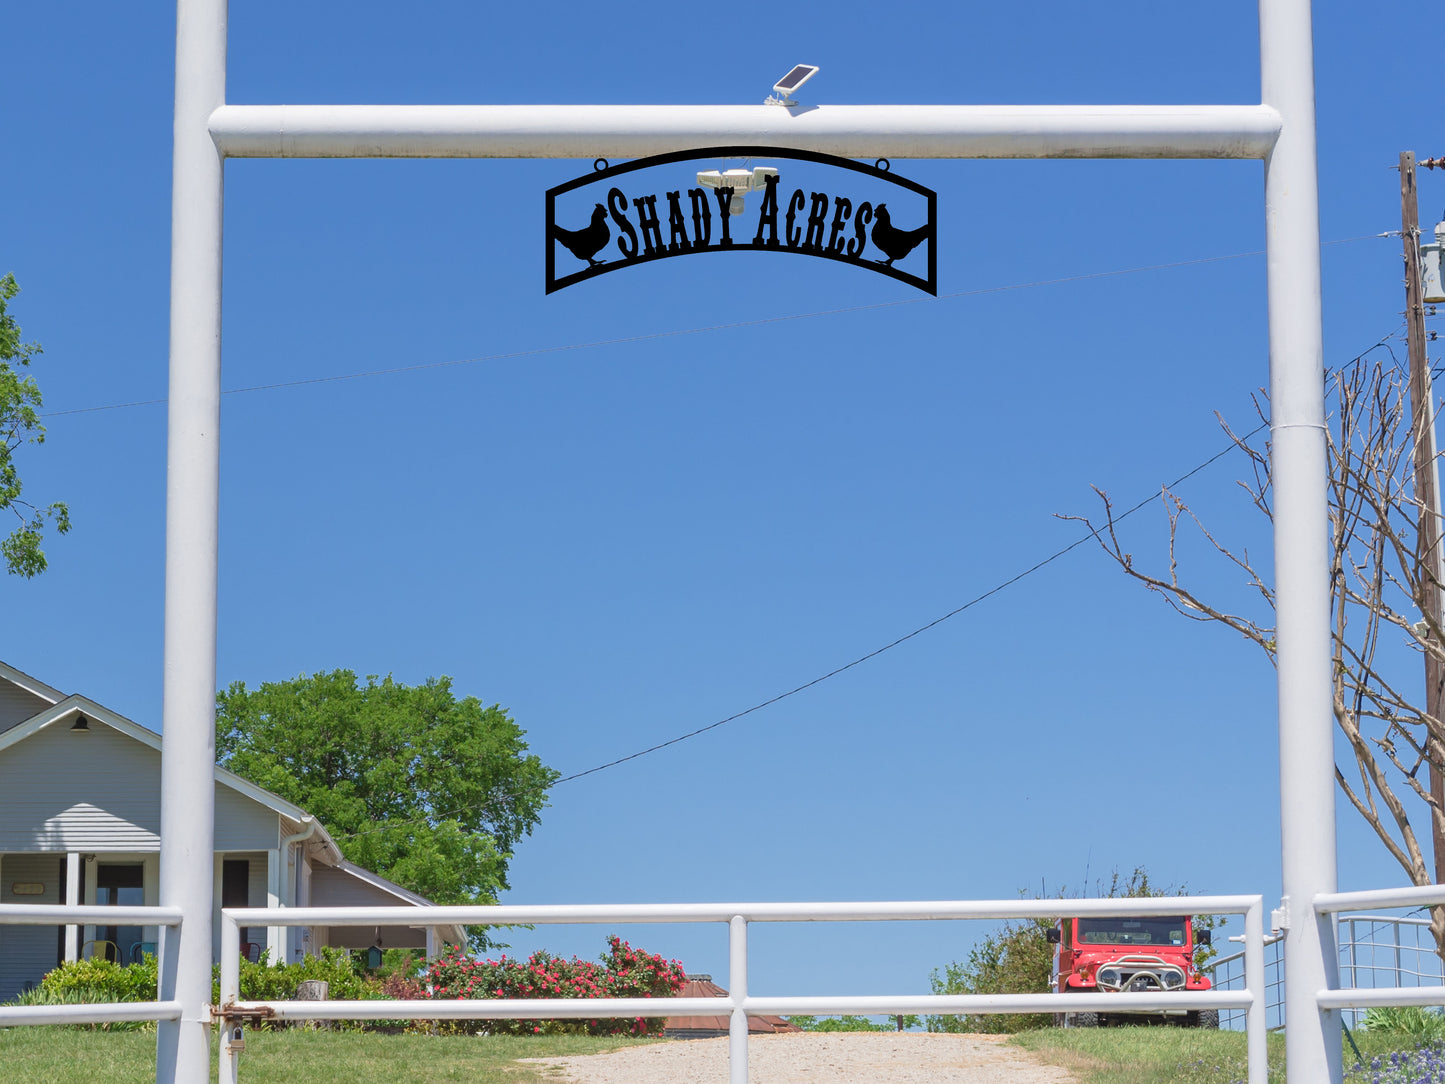 Large Entrance/Gate Arch Farm Sign with Chickens